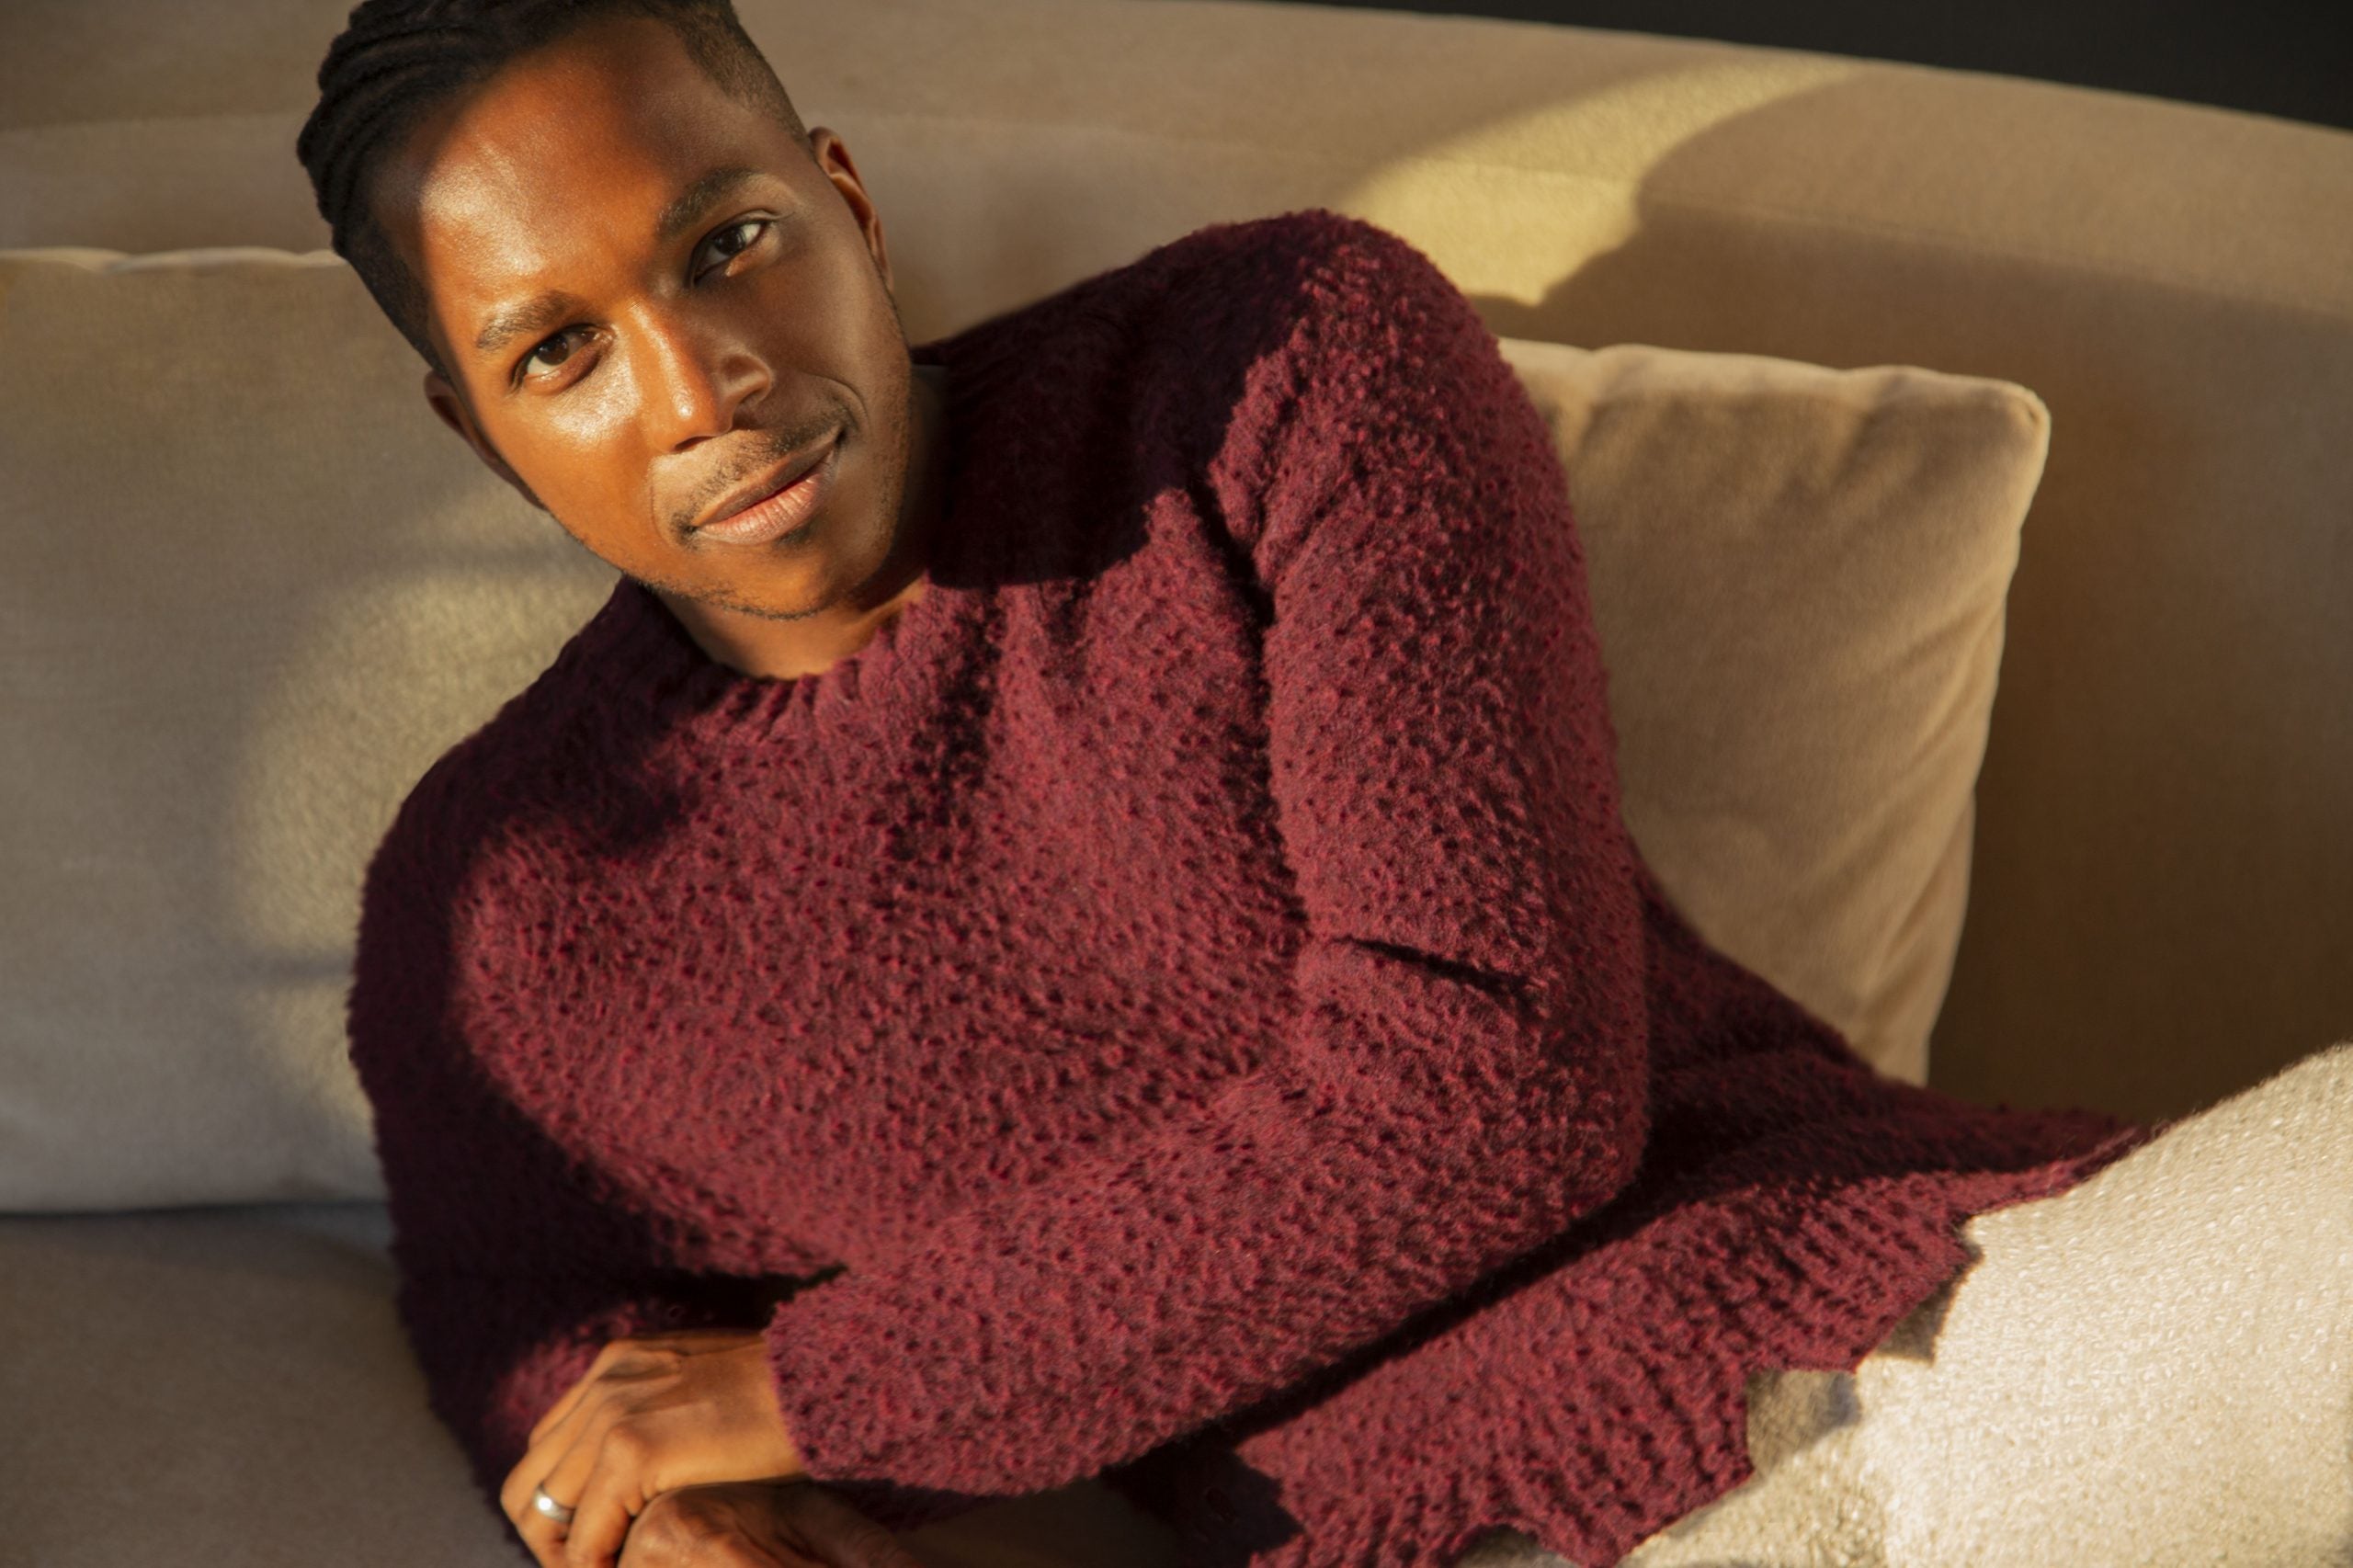 Leslie Odom, Jr. Teams Up With Wells Fargo To Highlight Resilient Black Entrepreneurs That 'Made A Way'